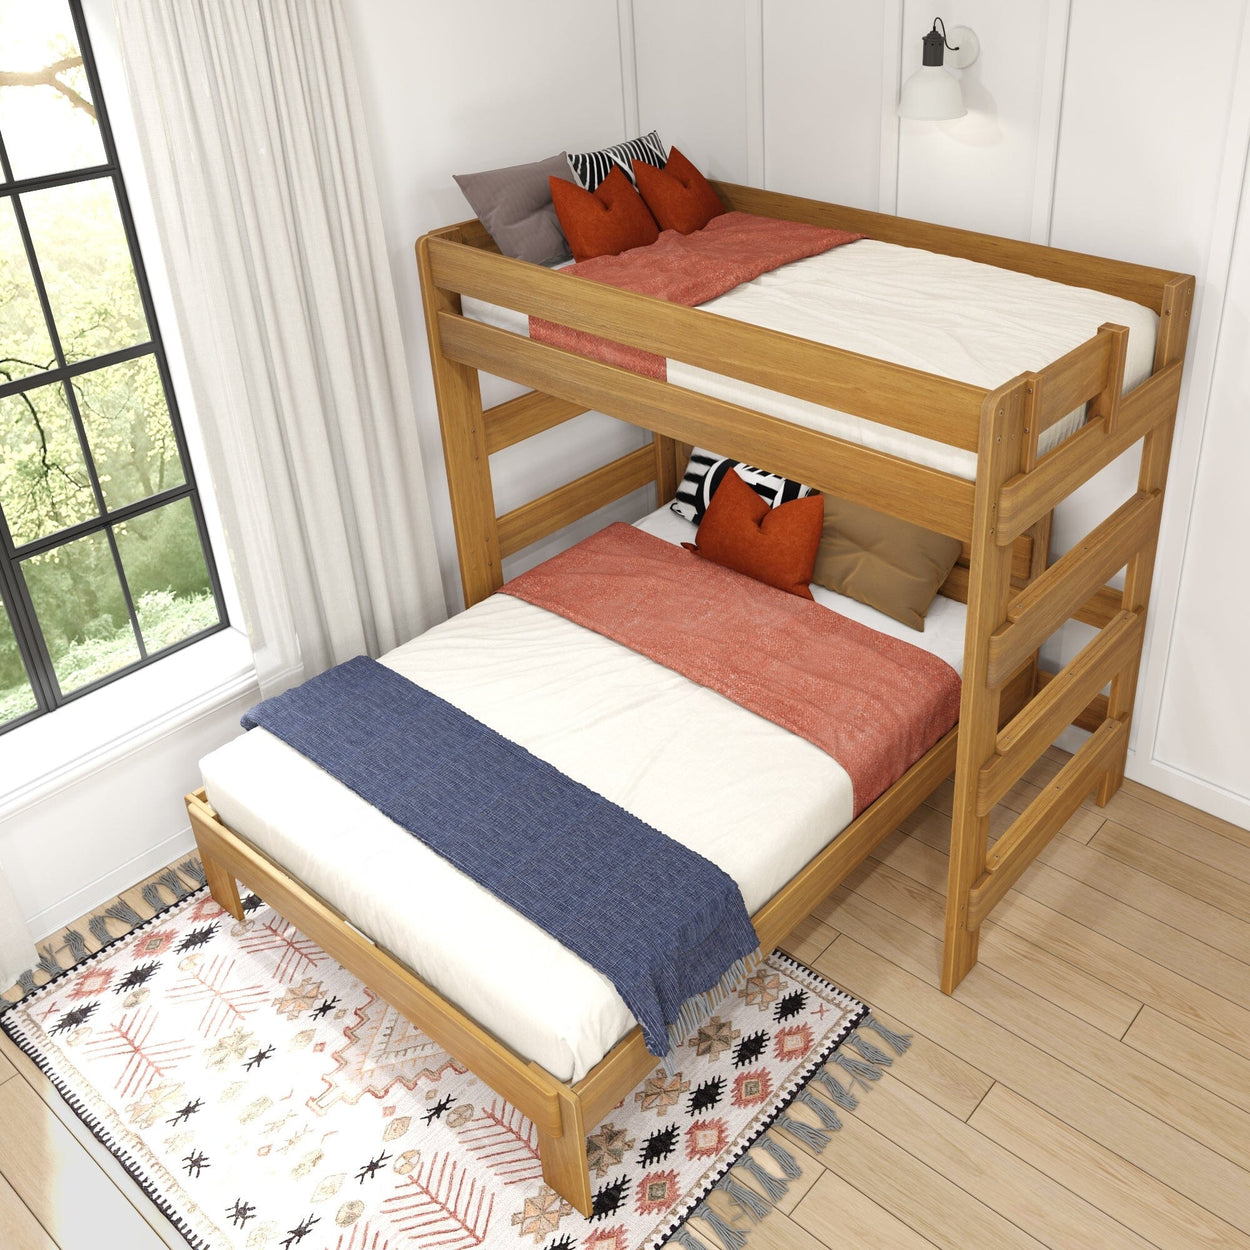 19-813-187 : Bunk Beds Farmhouse Twin over Queen L-Shaped Bunk Bed, Pecan